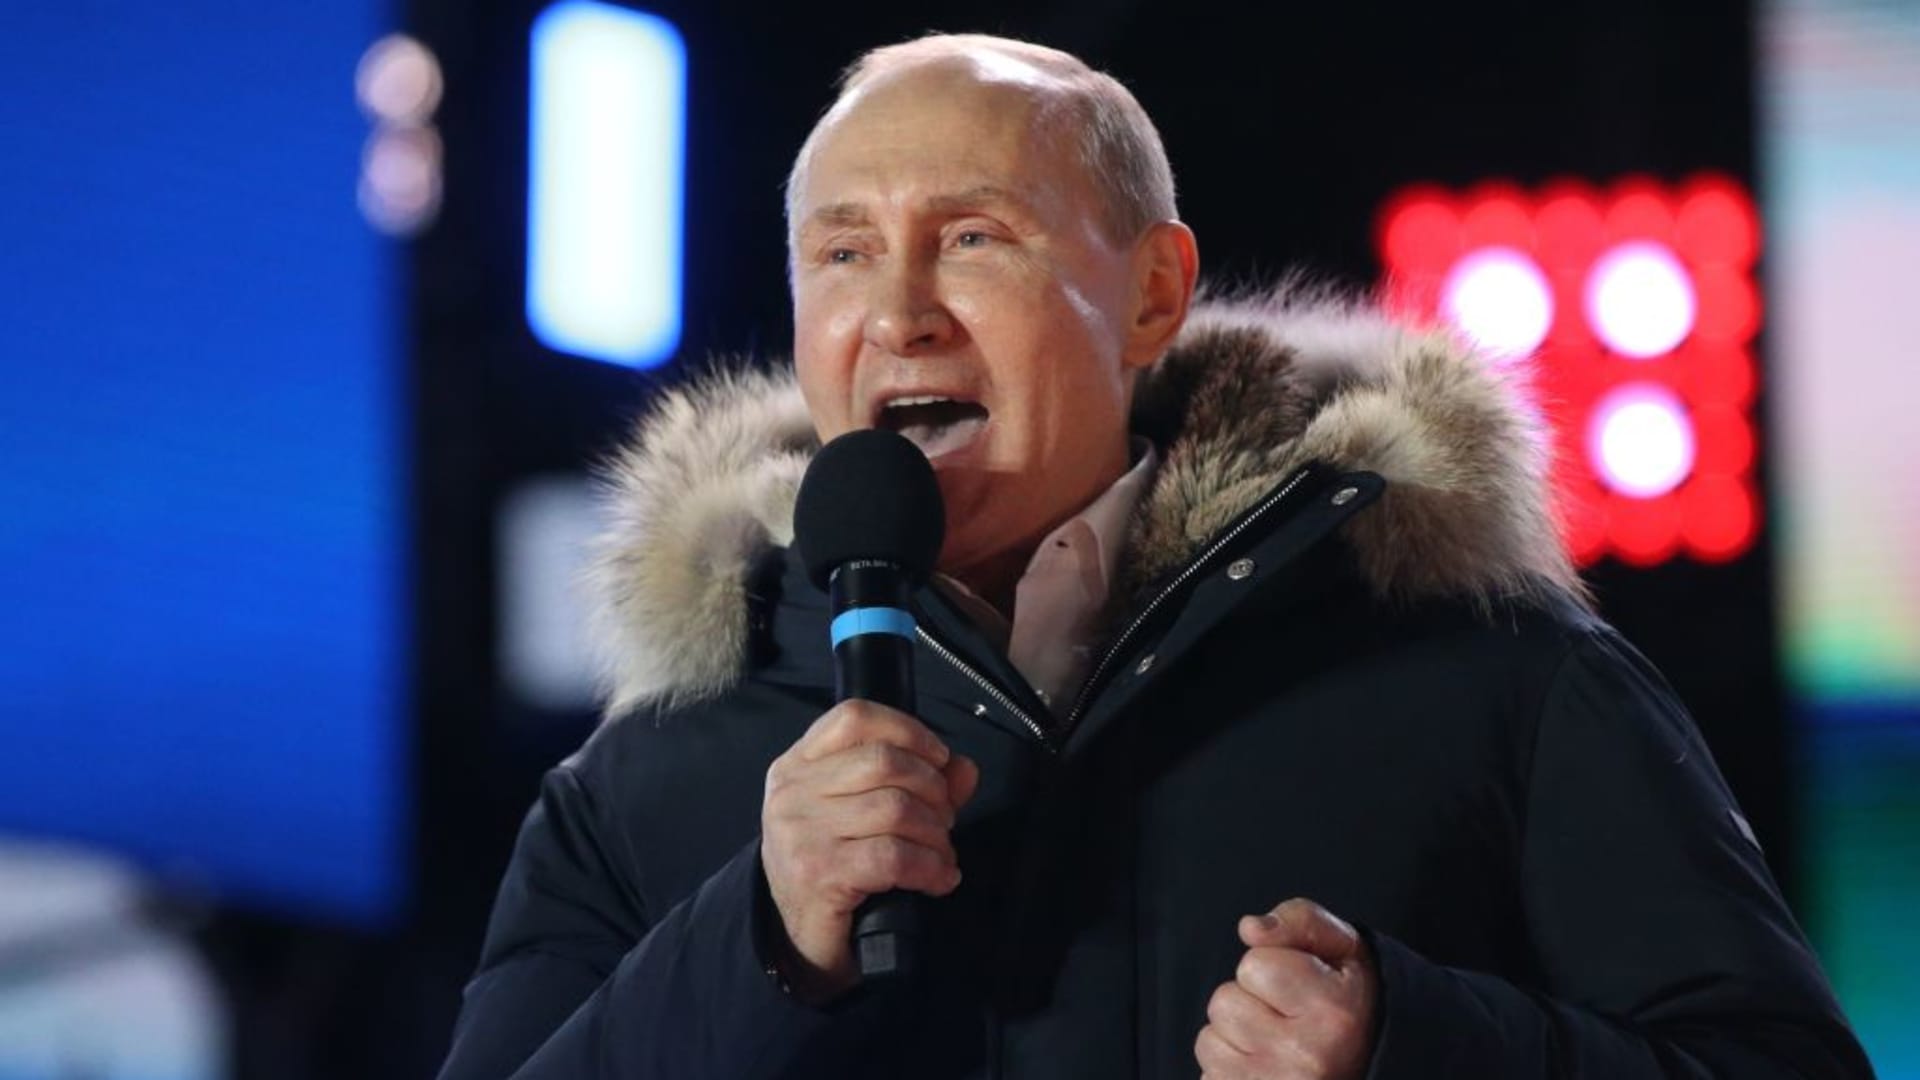 Kremlin says Putin will 'win confidently' if he runs in the 2024 presidential election